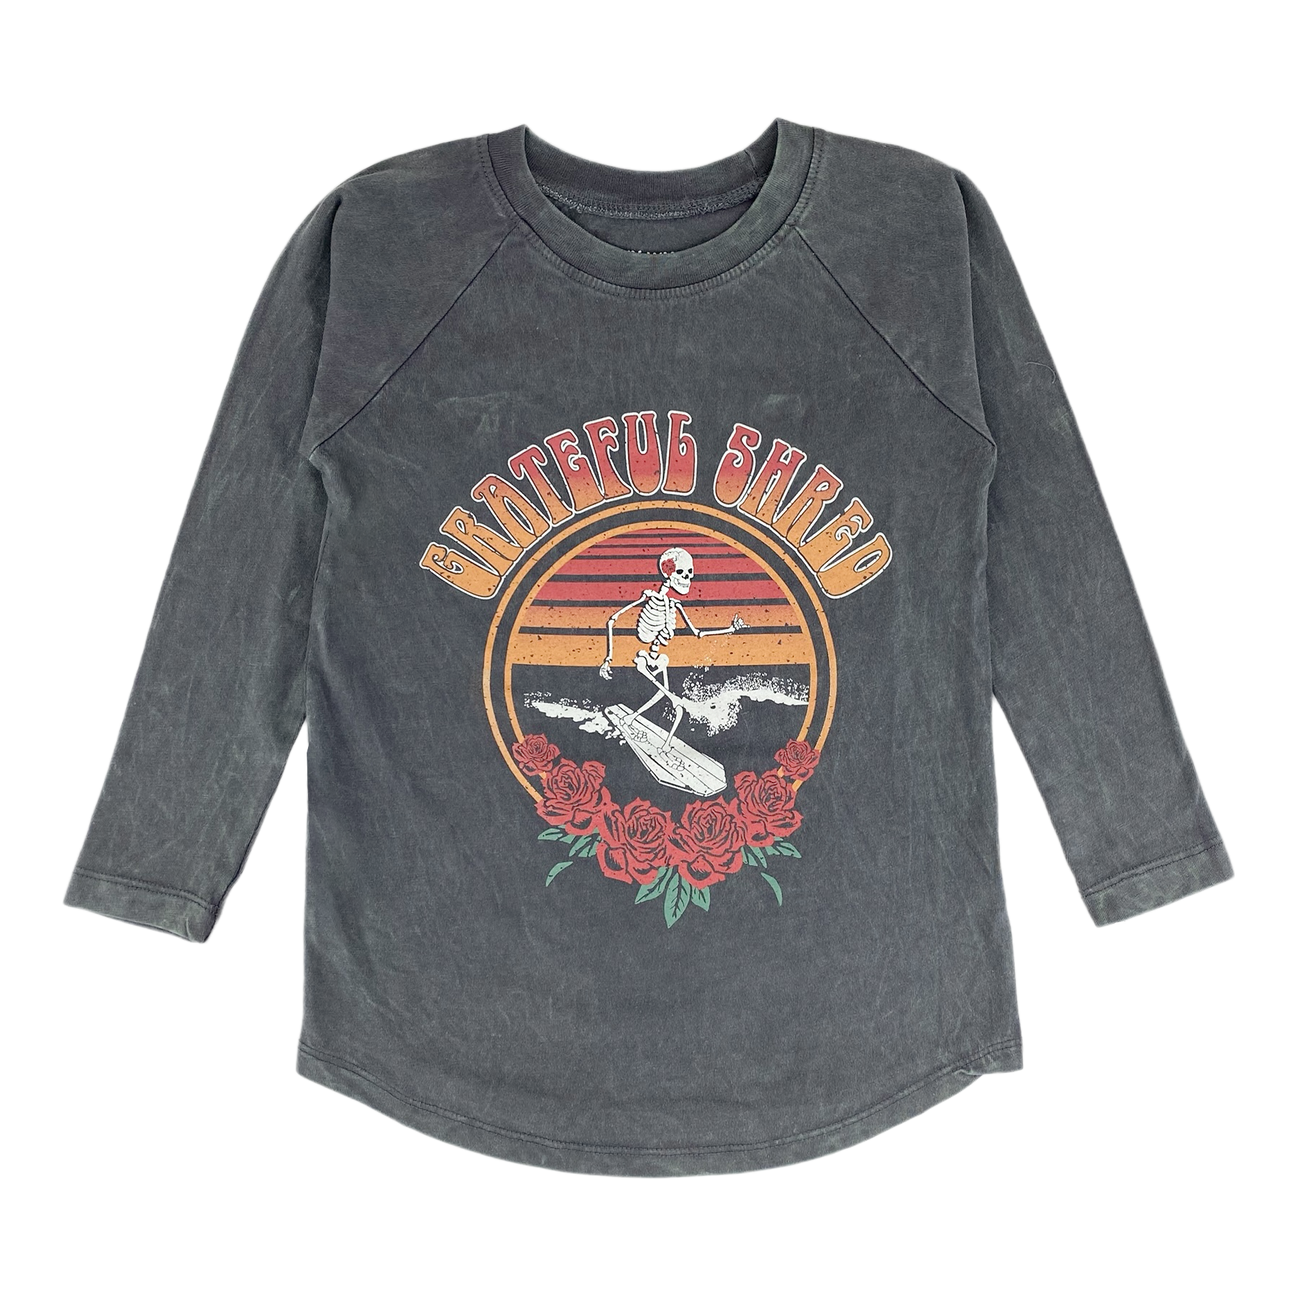 'Grateful Shred' Long Sleeve Tee Tea for Three: A Children's Boutique